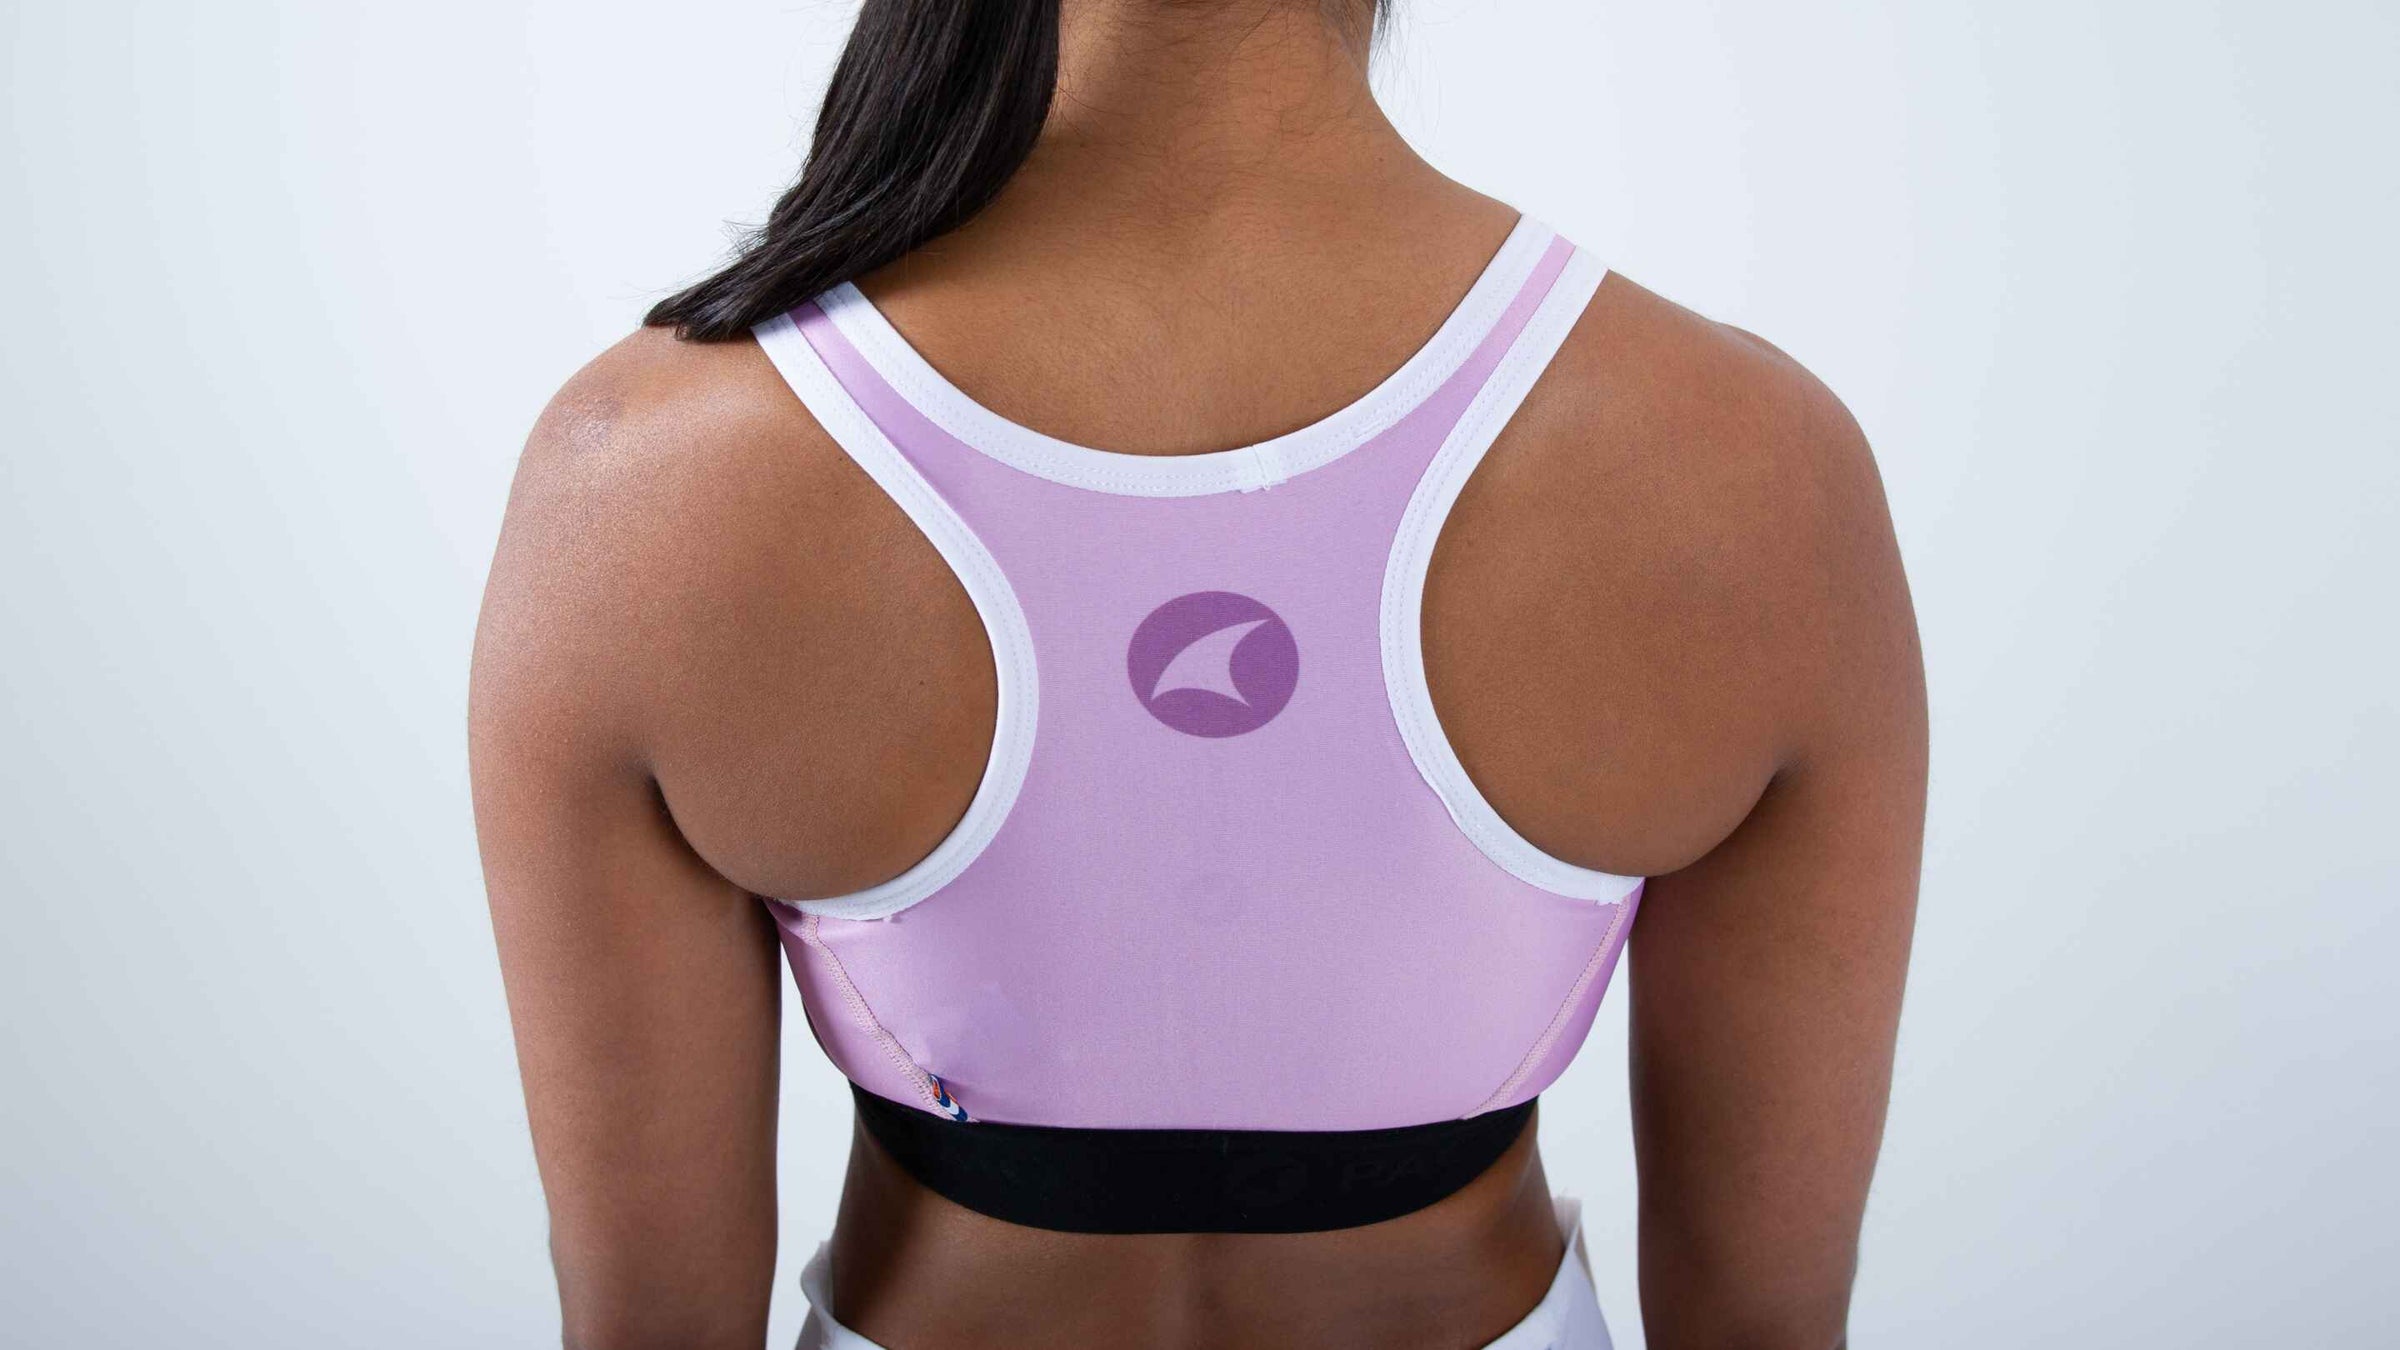 Women's Cycling Sports Bras from Indy freelance